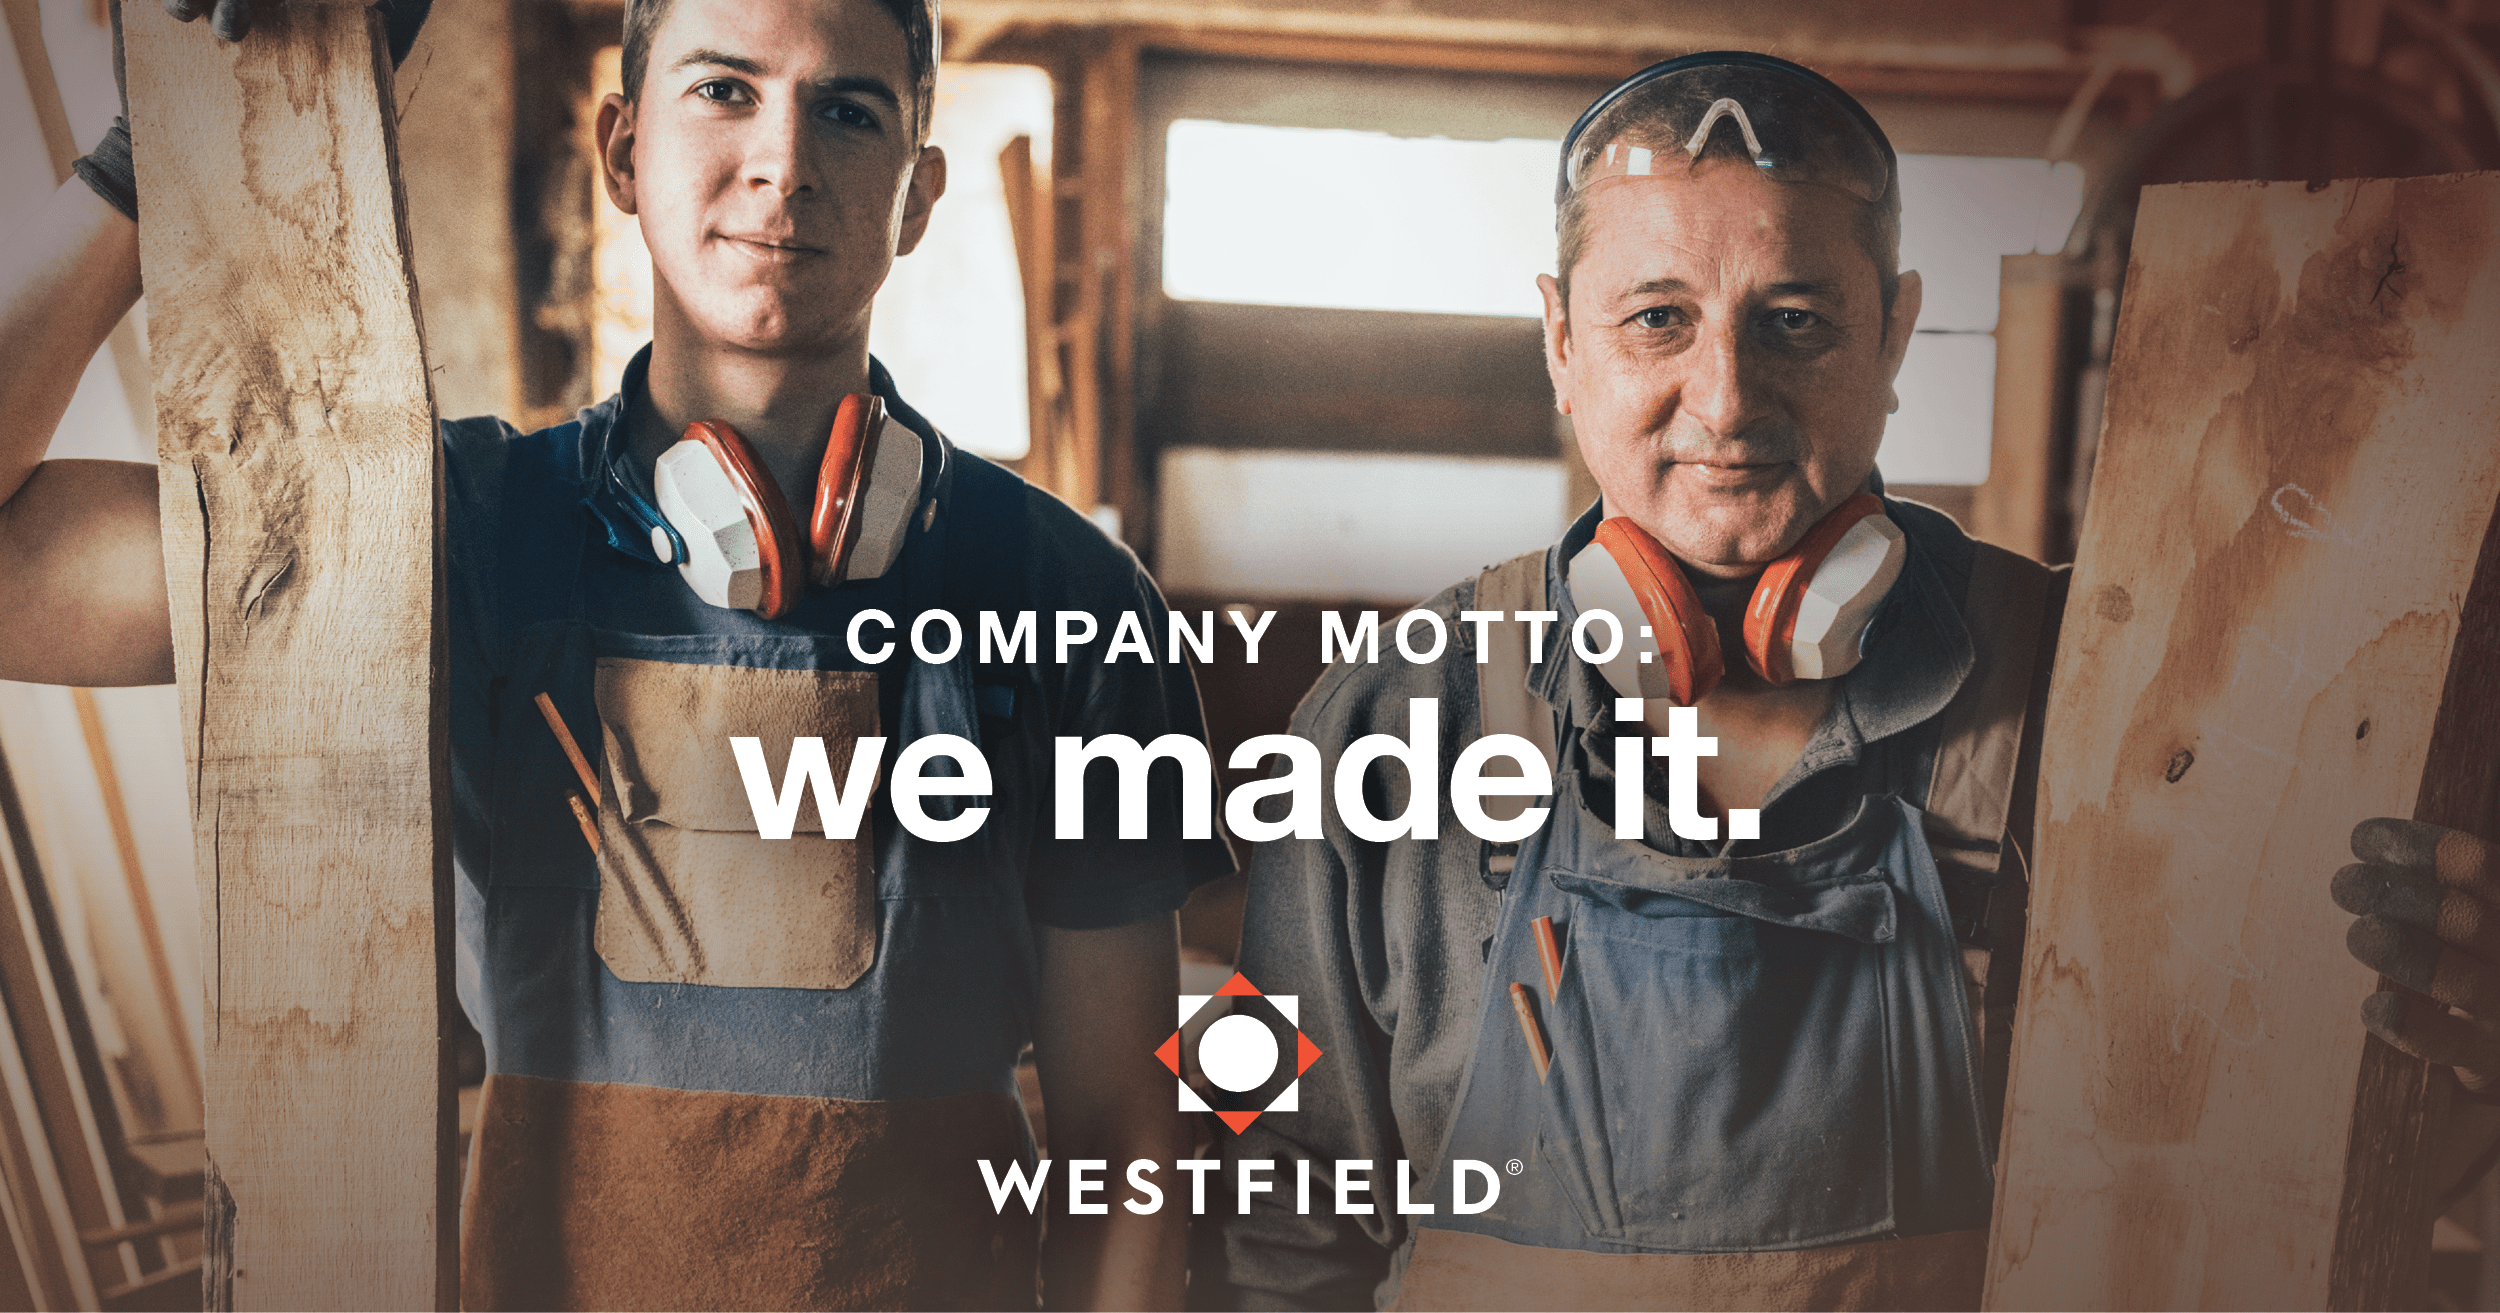 Westfield Small Business Manufacturing We Made It Social Ad